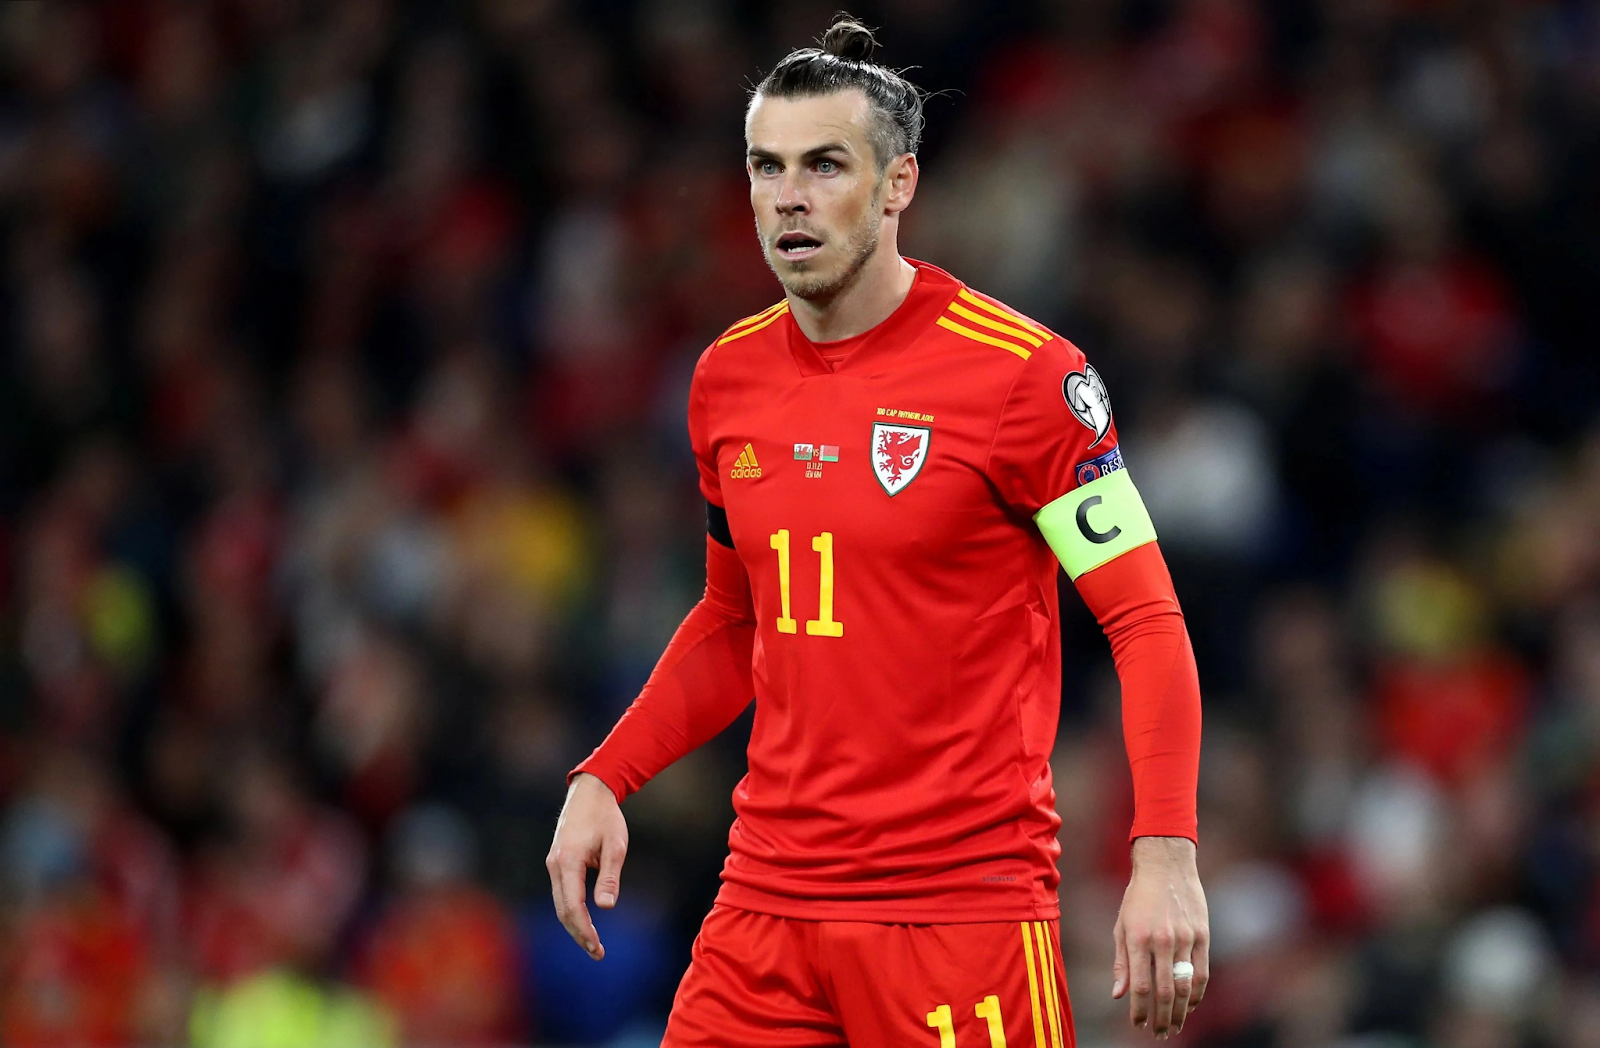 Gareth Bale and his men have a tough road ahead of them to make it into the World Cup